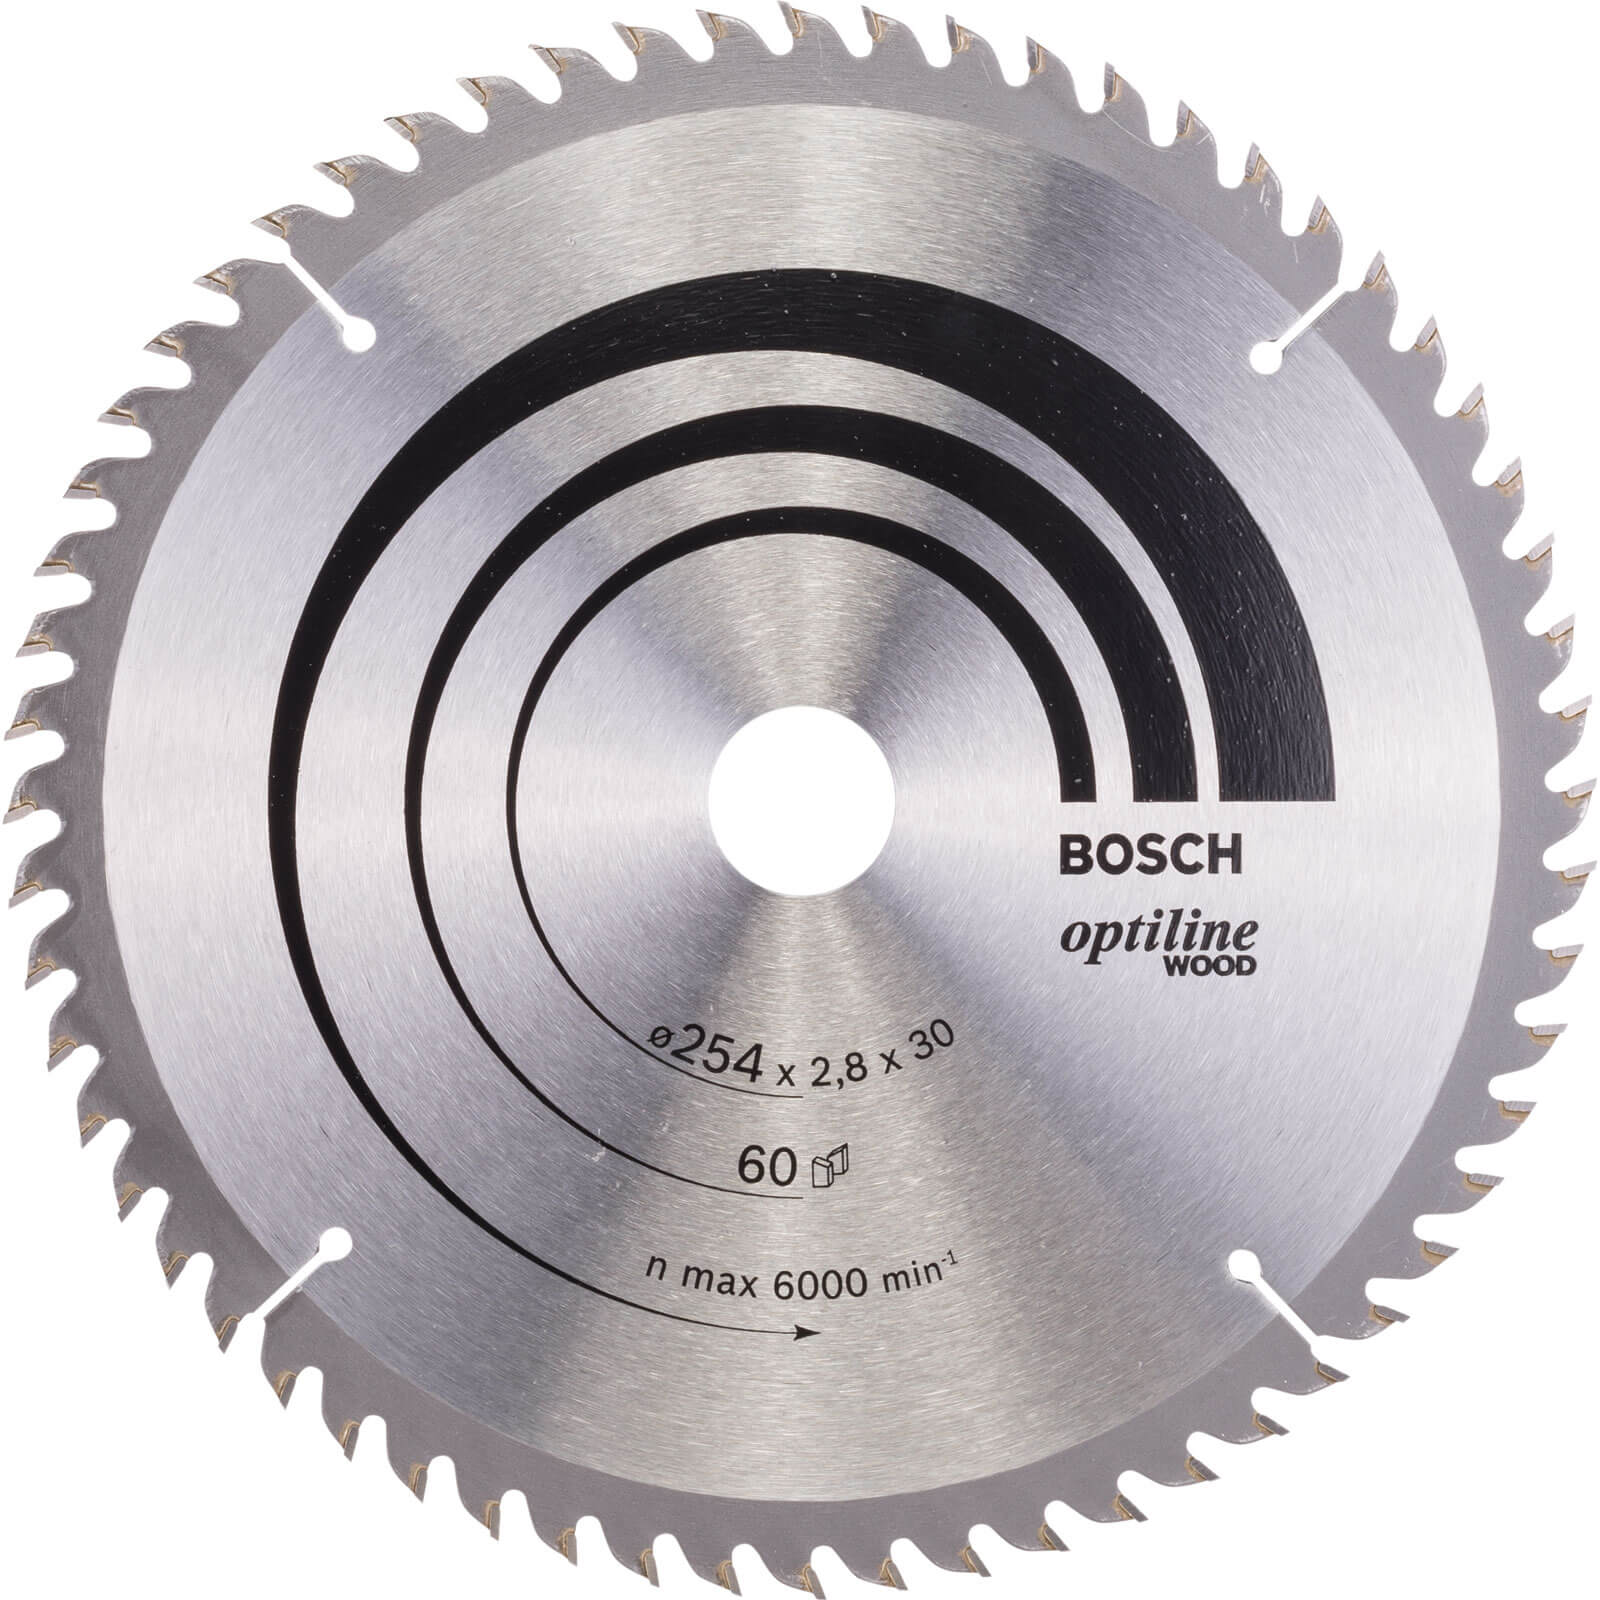 Image of Bosch Optiline Wood Cutting Mitre Saw Blade 254mm 60T 30mm